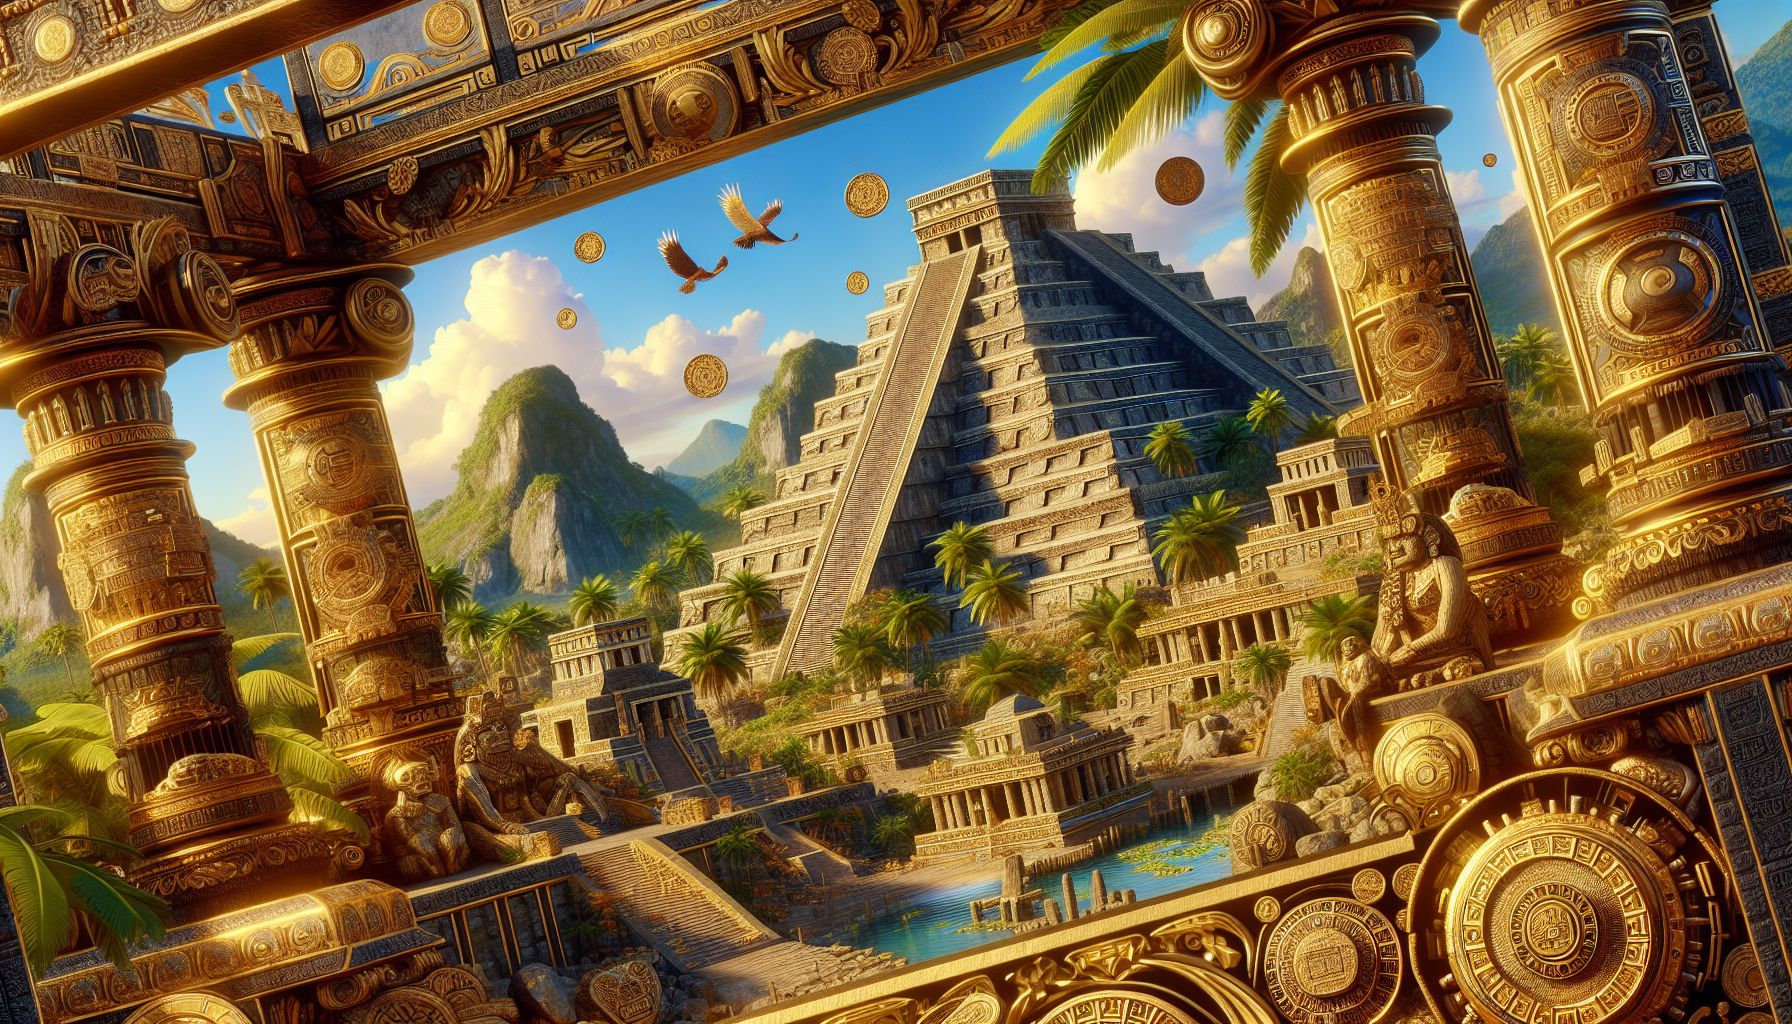 Welcome to the vibrant and ancient world of the Aztec Empire, where riches and treasures beyond your wildest dreams await. In the dizzying world of online gambling, few slots can match the excitement and splendor of Aztec Empire: Gold of the Gods, available on Progressive jackpot, Slotomania – Slot Machines, Mobile gambling, Judi online, and Game kasino platforms.